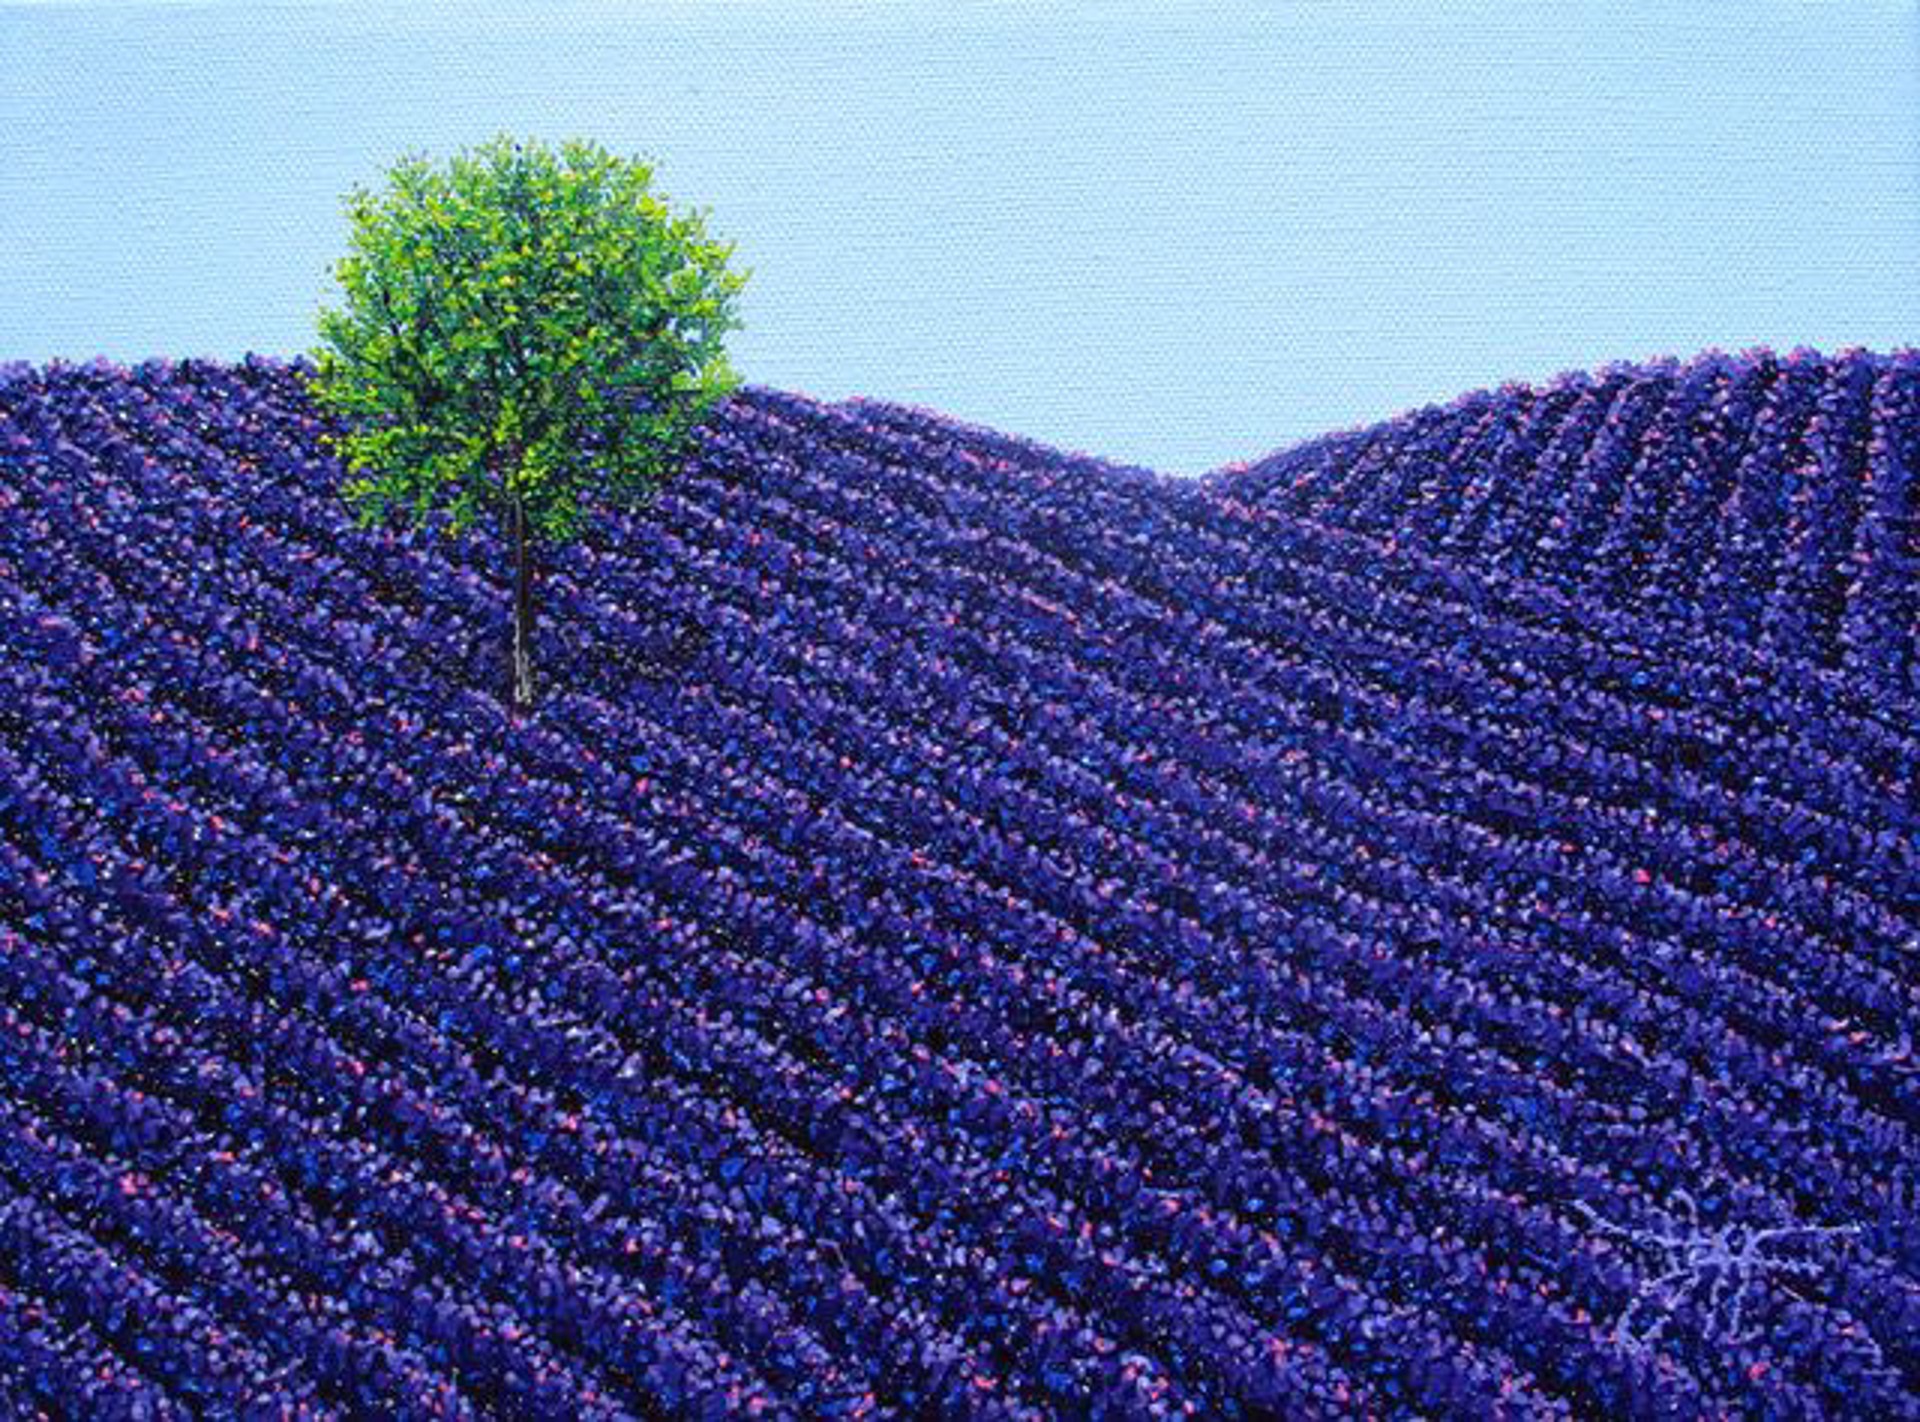 Lavender for Everyone by Jay Maggio